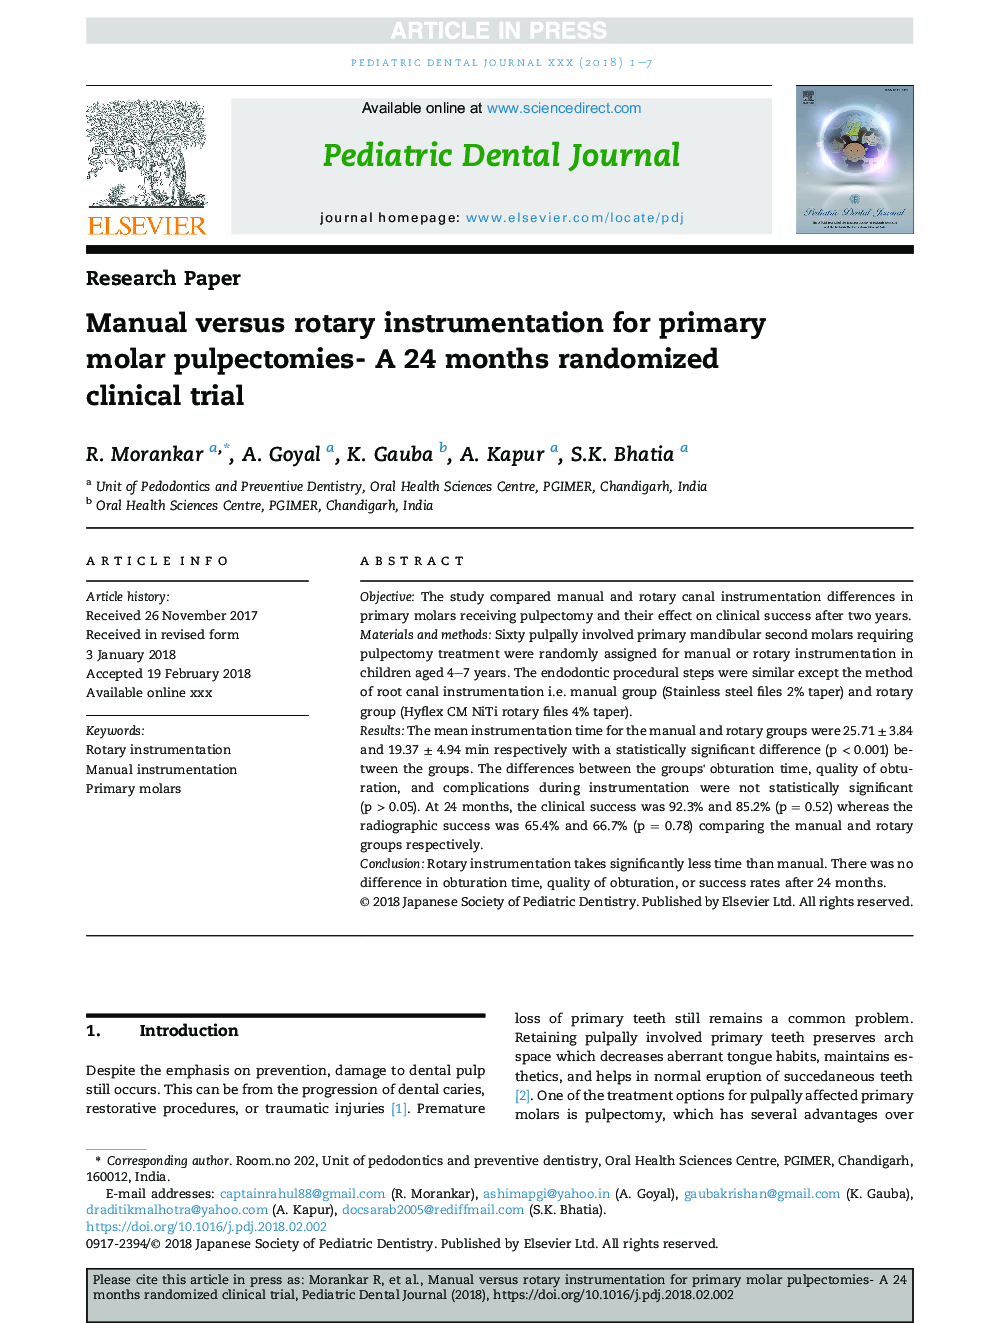 Manual versus rotary instrumentation for primary molar pulpectomies- A 24 months randomized clinical trial